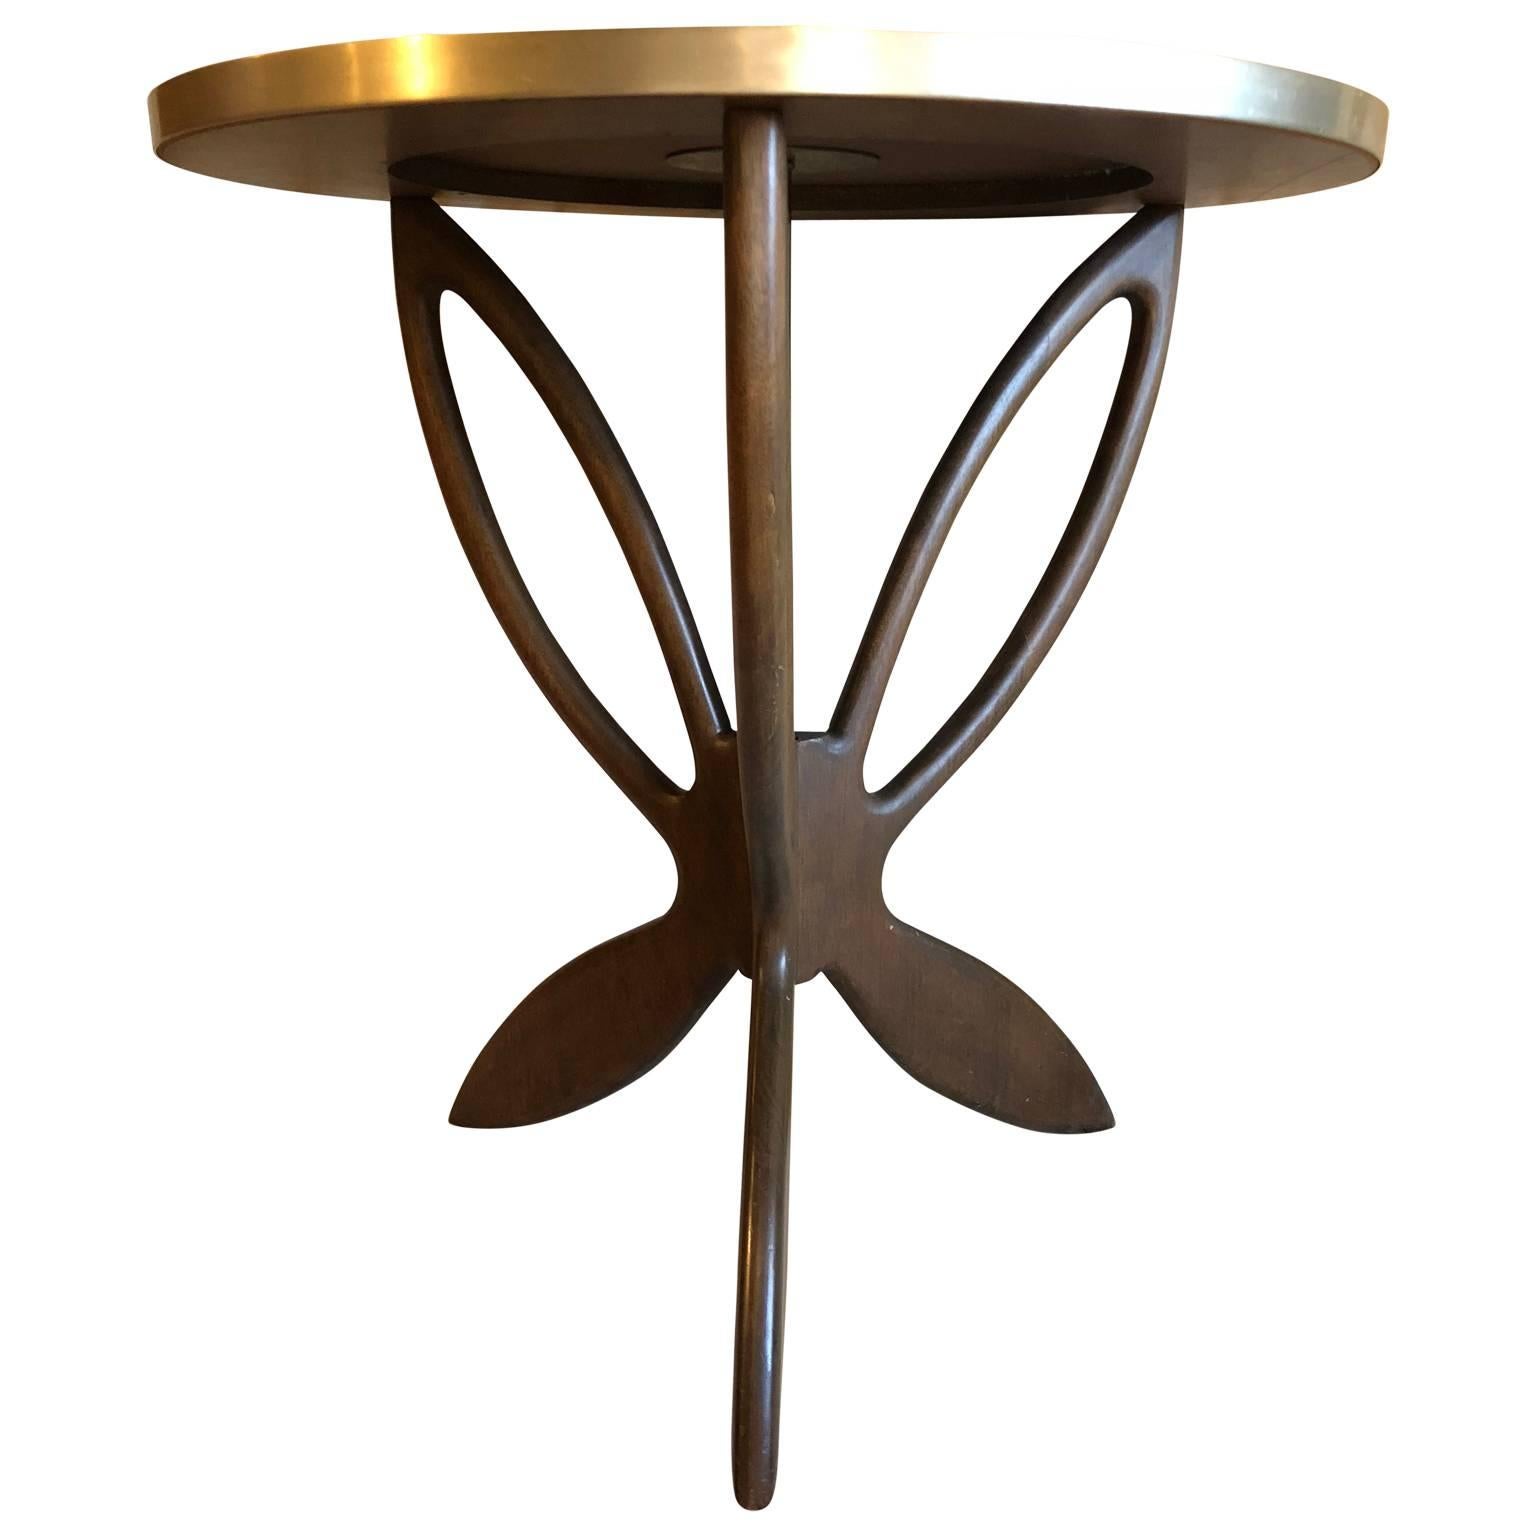 Round modern tile top cocktail table with wooden butterfly legs.